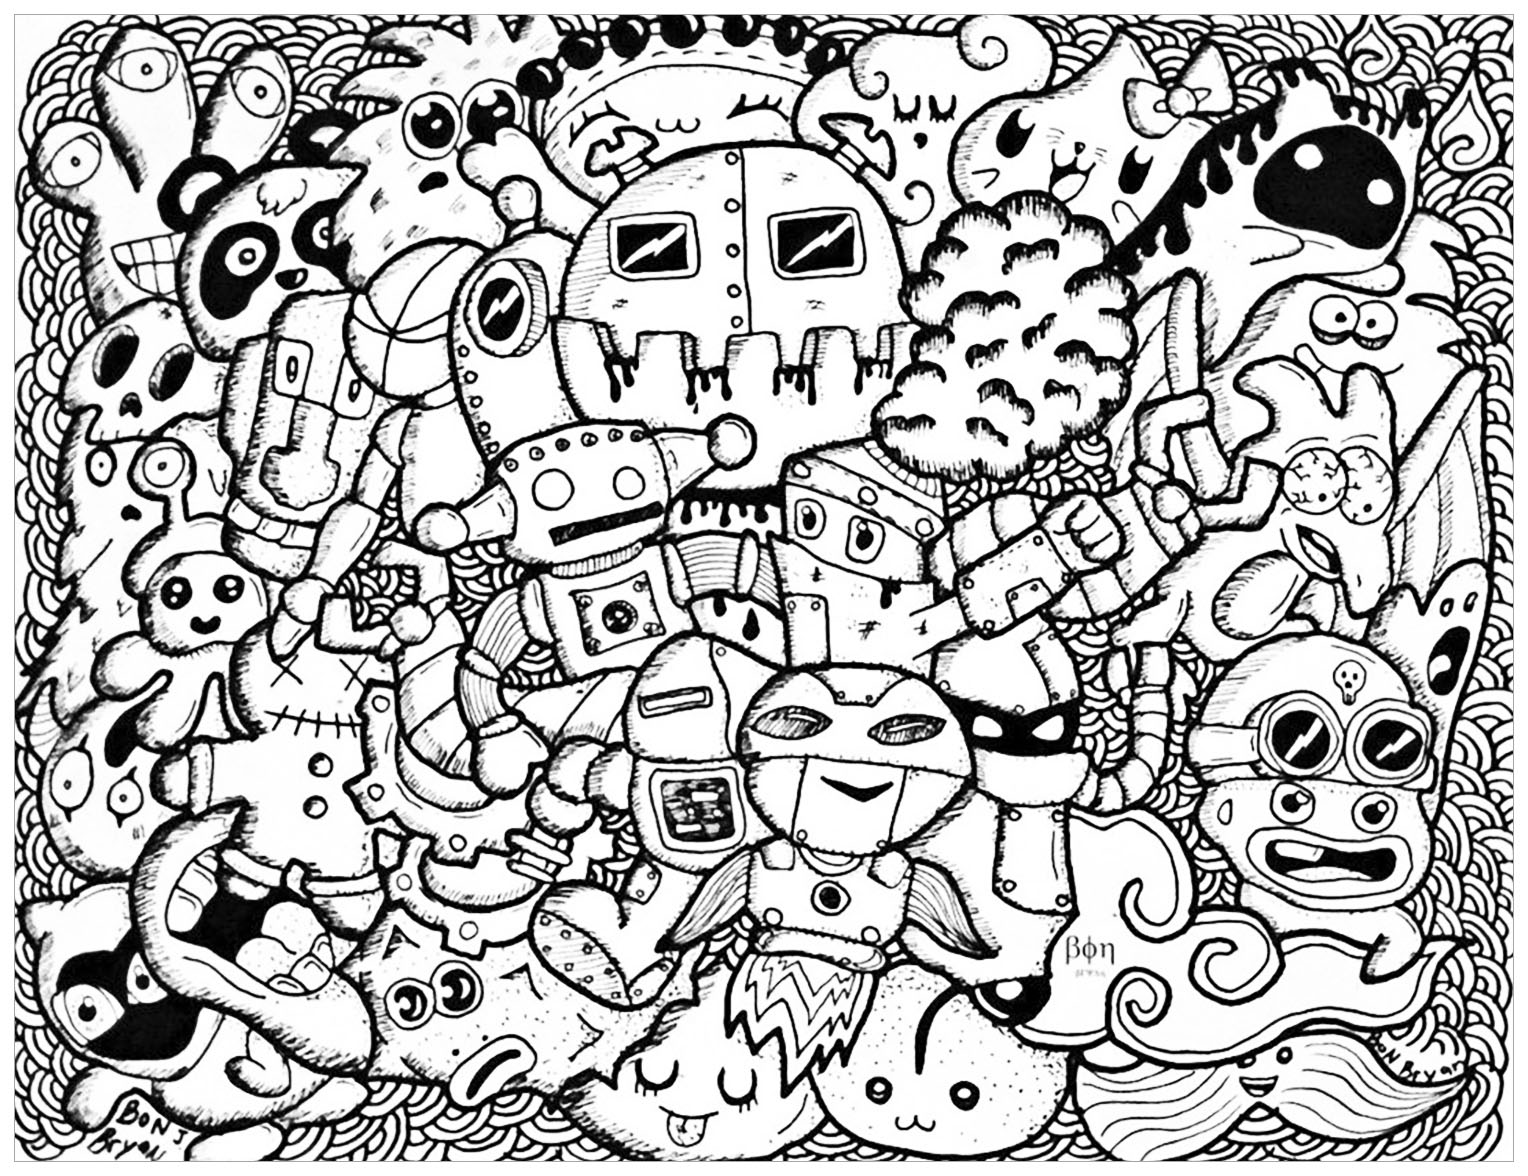 Doodle Art A Leisurely Analysis